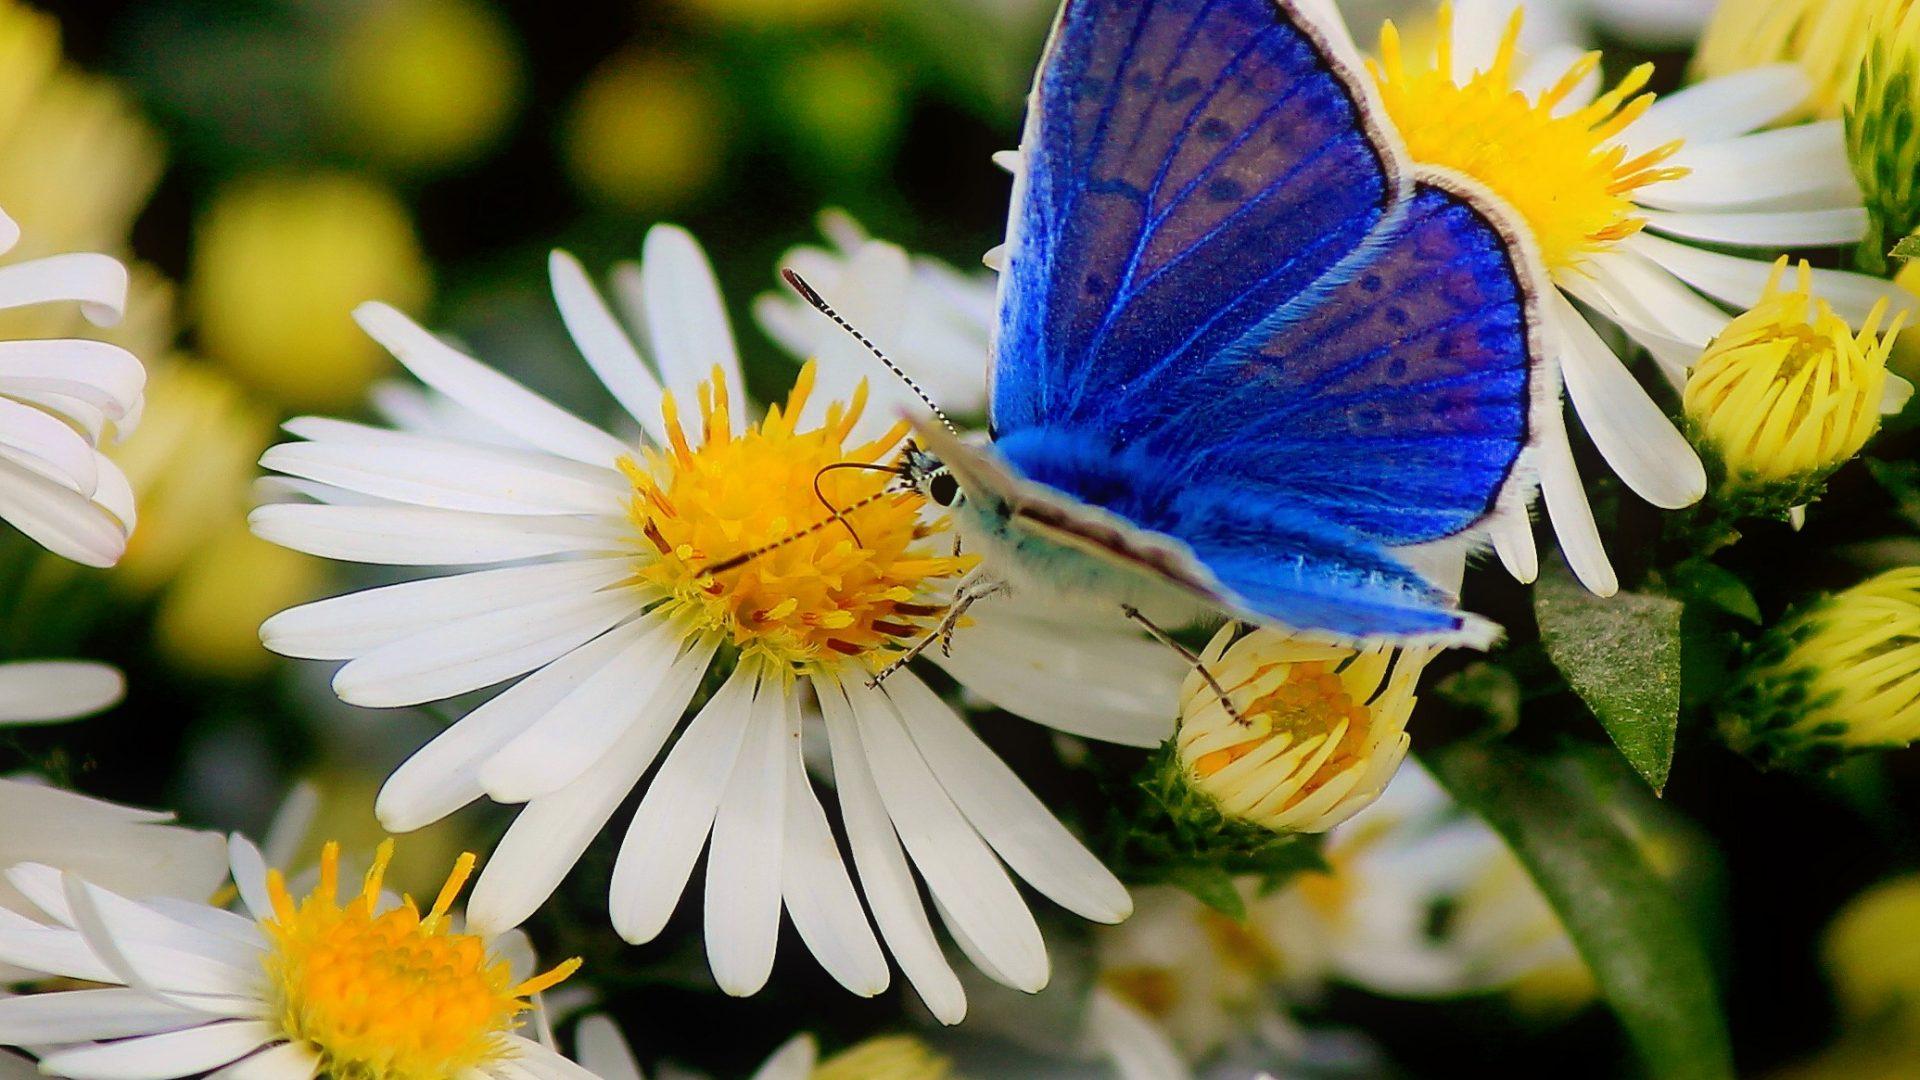 Flowers Daisies Nature Butterfly Pretty Beautiful Beauty